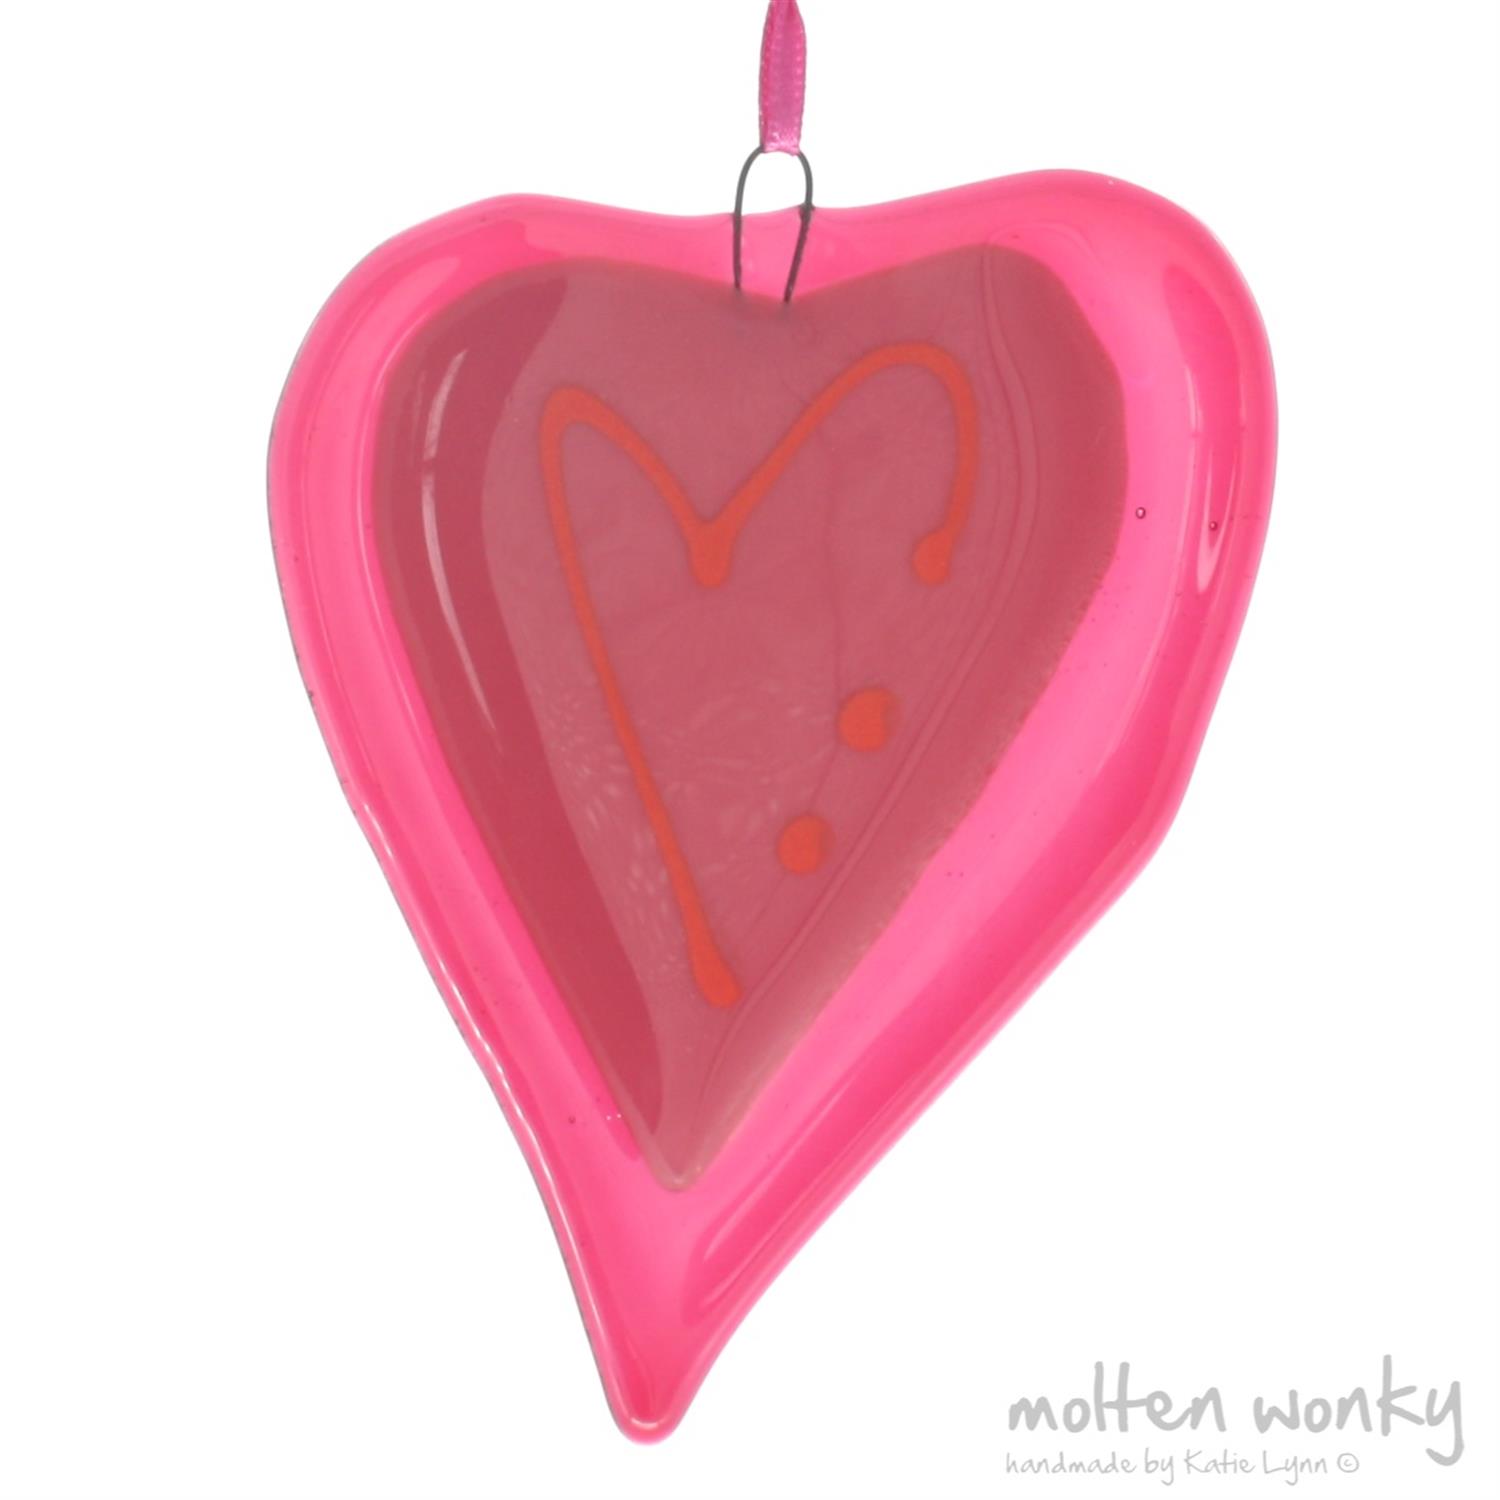 Molten Wonky | Fused glass love heart decoration